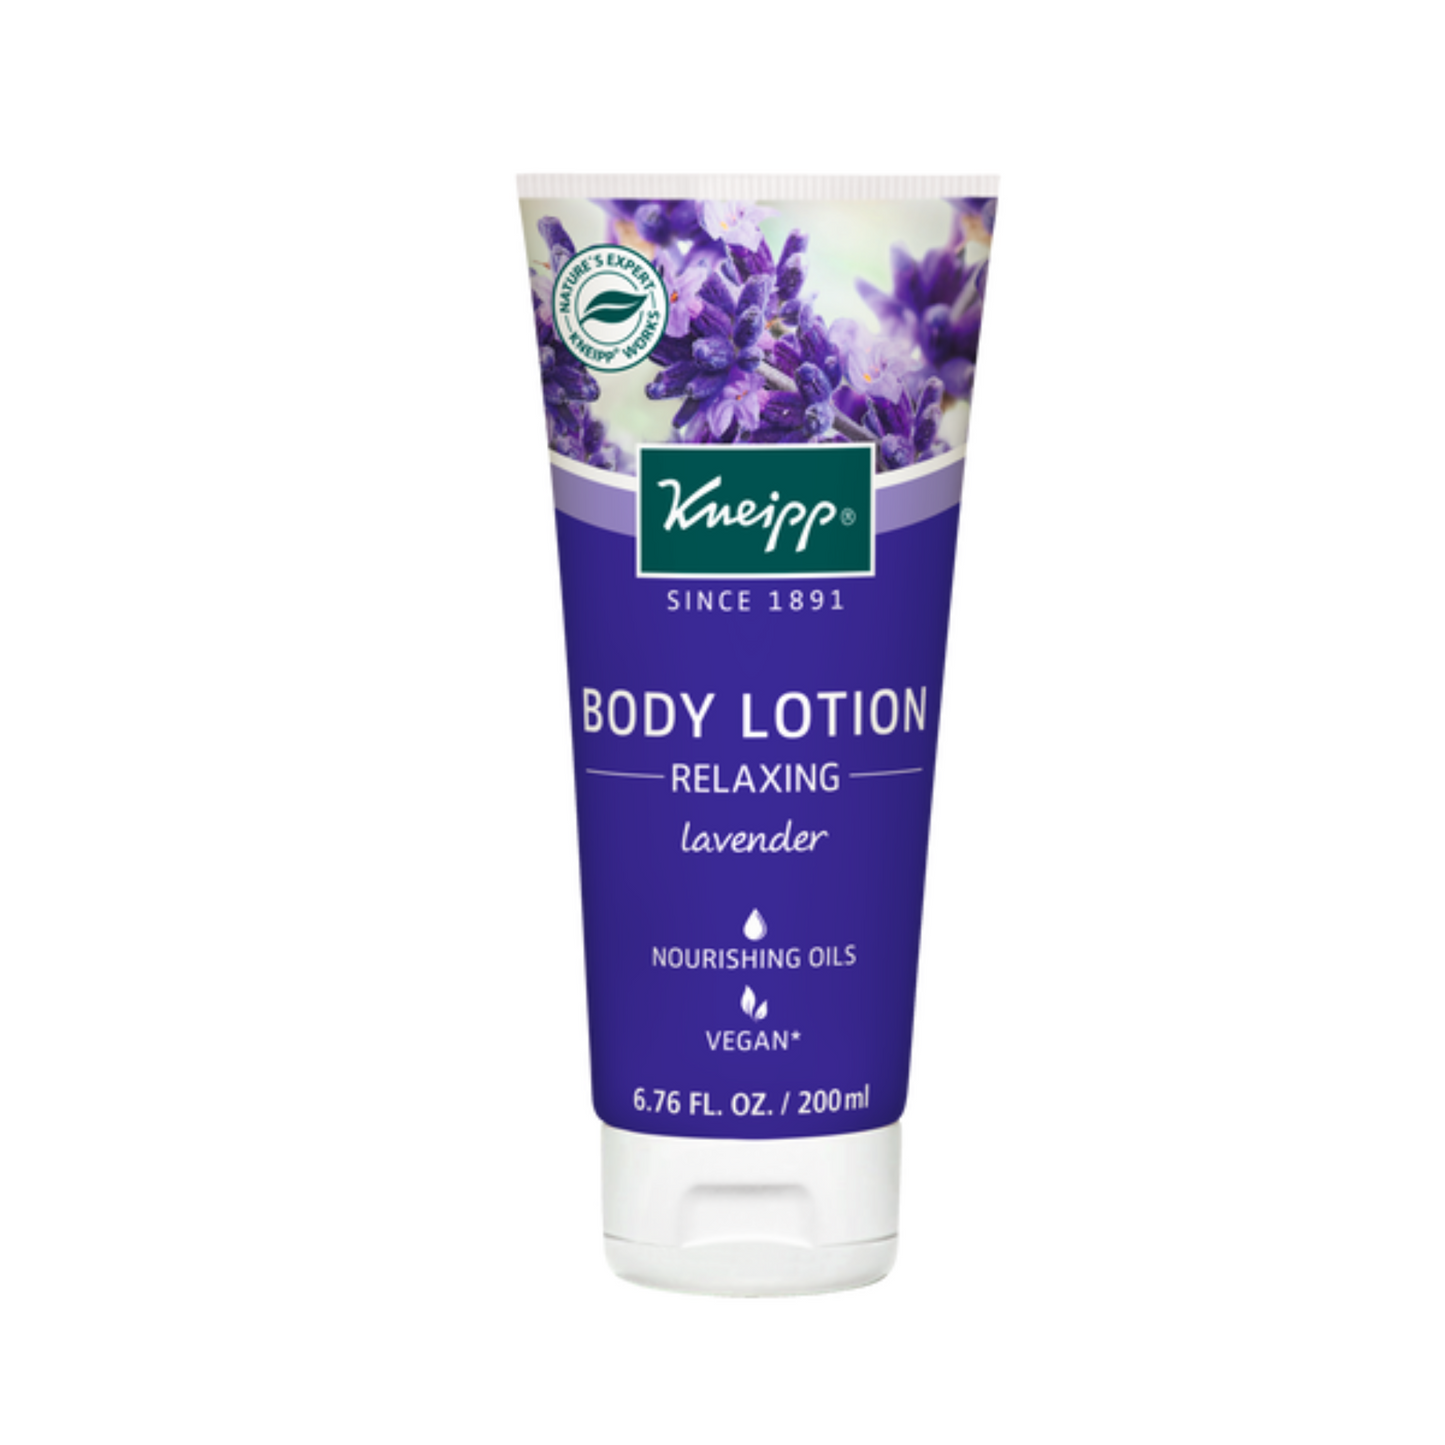 Primary Image of Lavender Relaxing Body Lotion (6.76 fl oz)